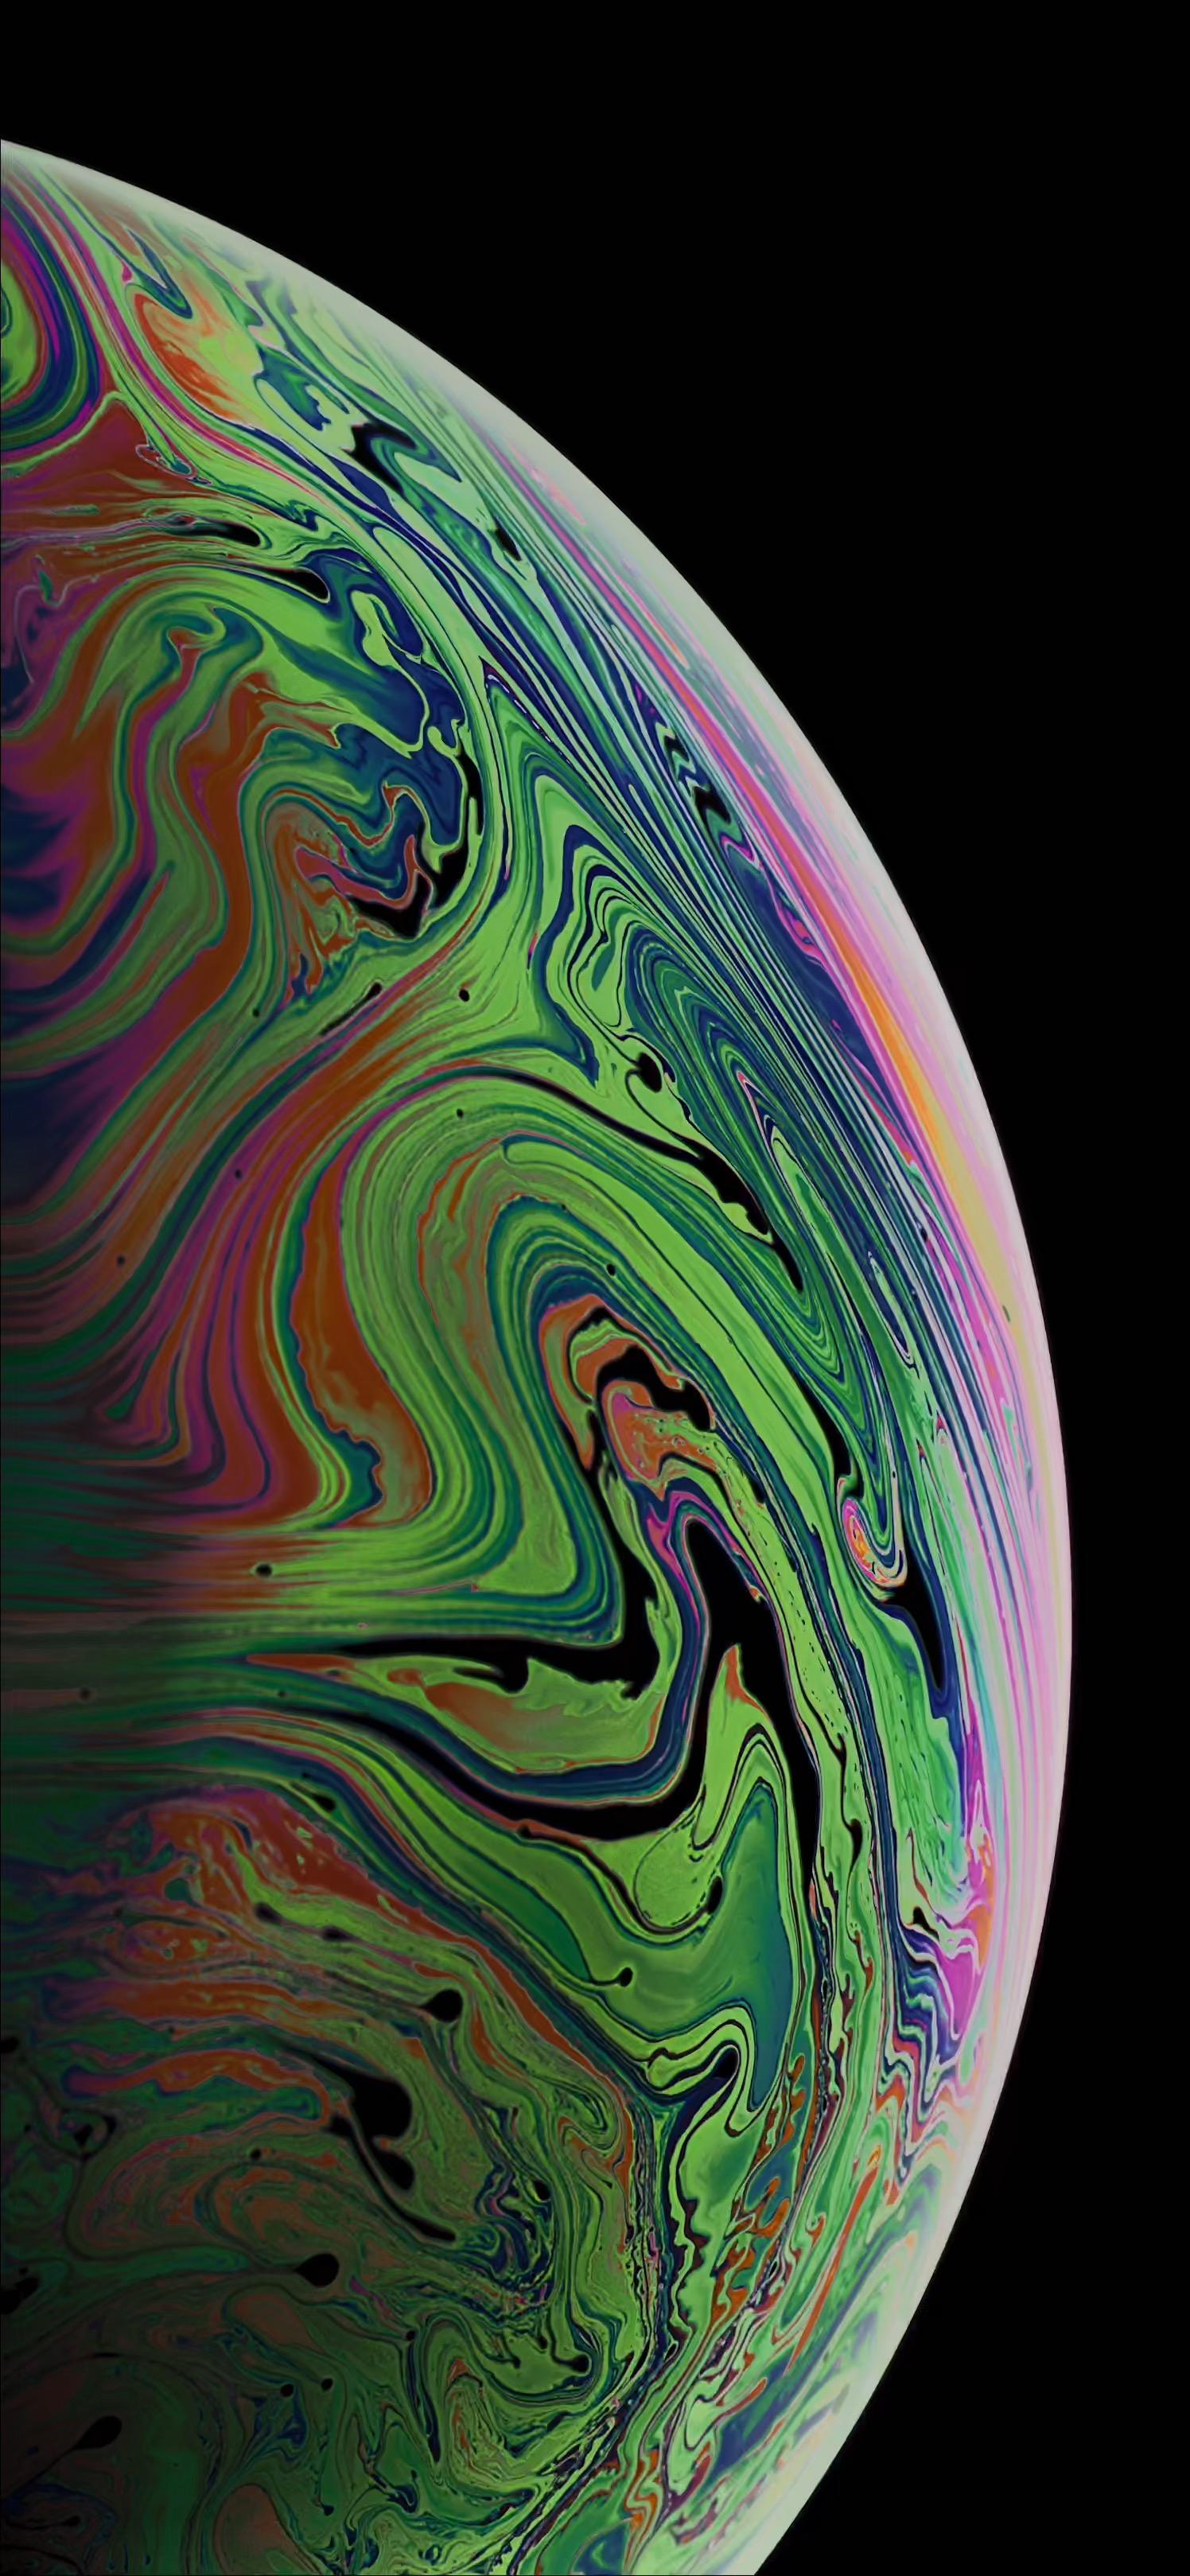 HD iPhone Xs Max Wallpapers - Wallpaper Cave